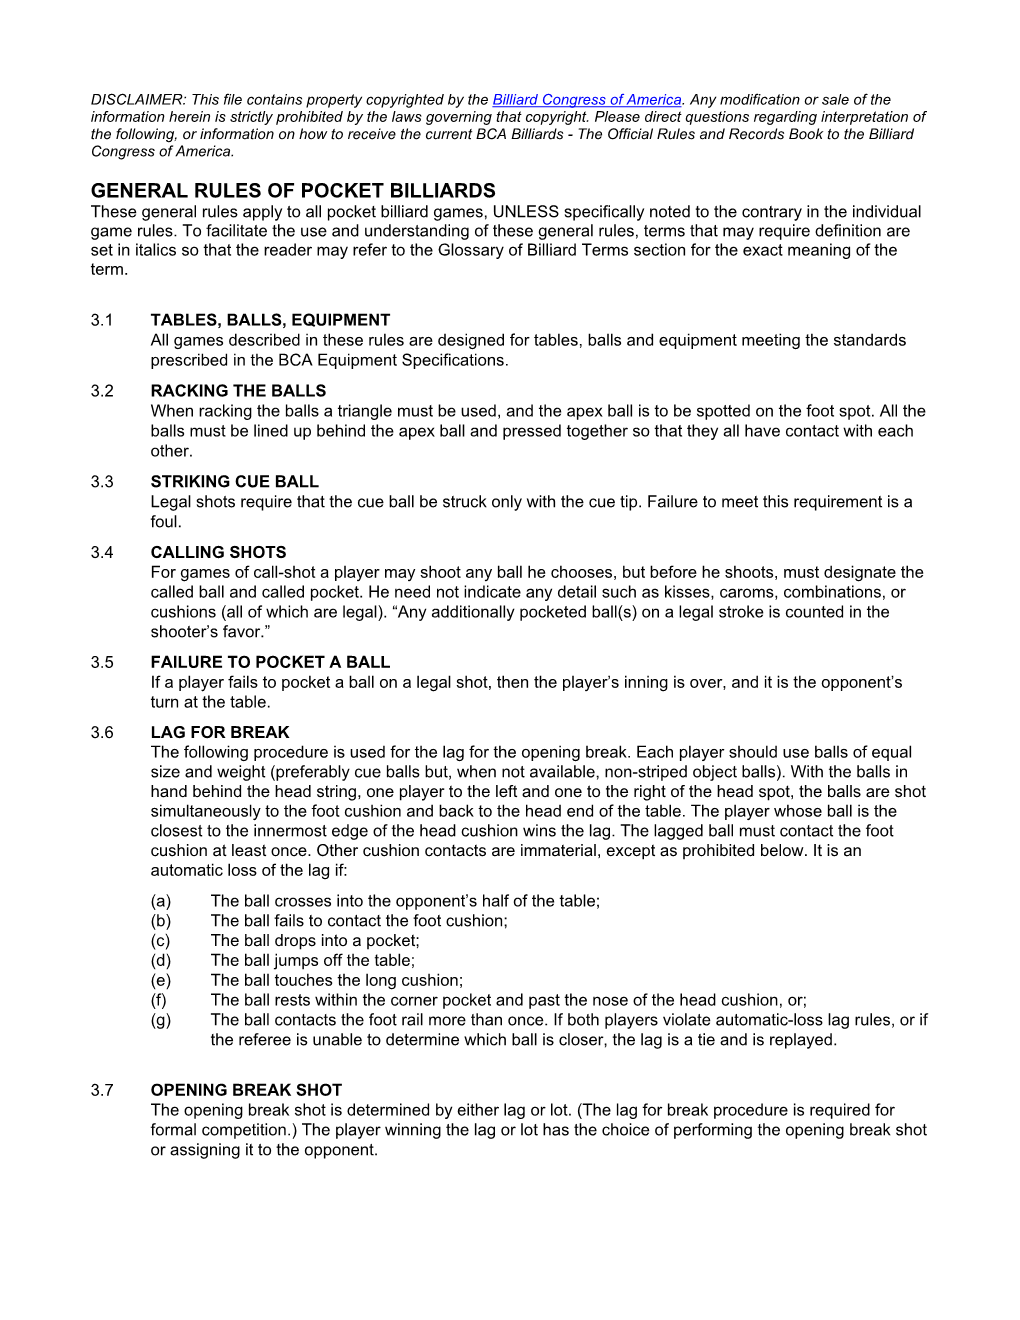 GENERAL RULES of POCKET BILLIARDS These General Rules Apply to All Pocket Billiard Games, UNLESS Specifically Noted to the Contrary in the Individual Game Rules